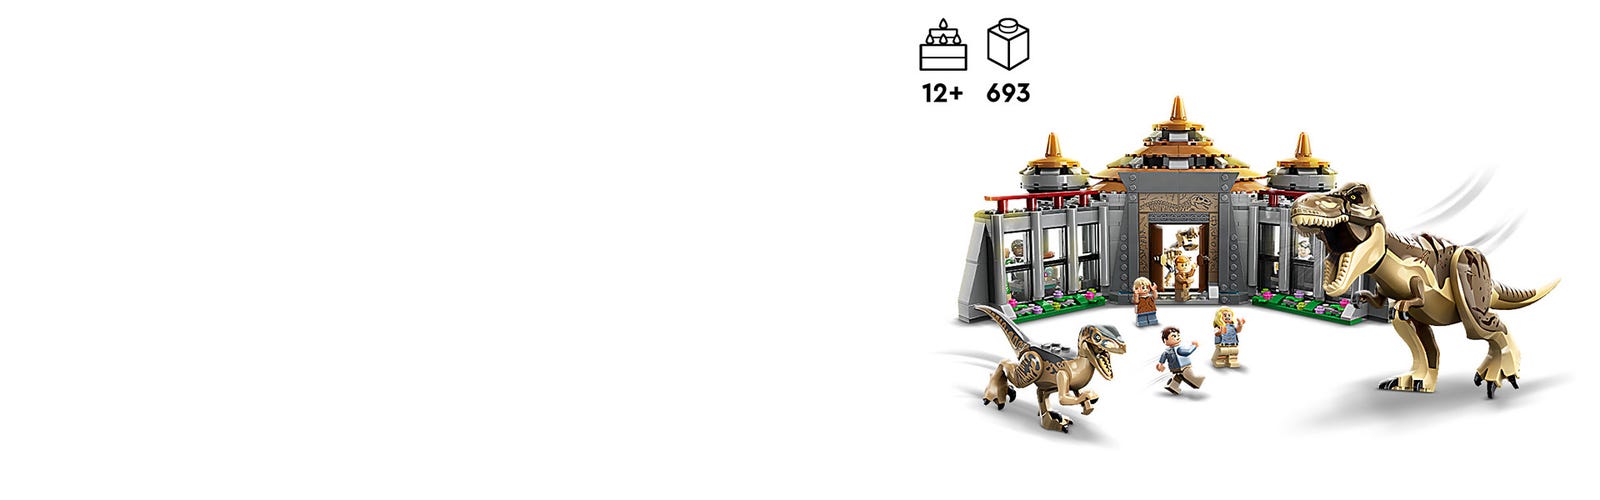 LEGO Jurassic Park Visitor Center: T. rex & Raptor Attack 76961 Buildable  Dinosaur Toy; Gift for Teens and Kids Aged 12 and Up, Including a Dino